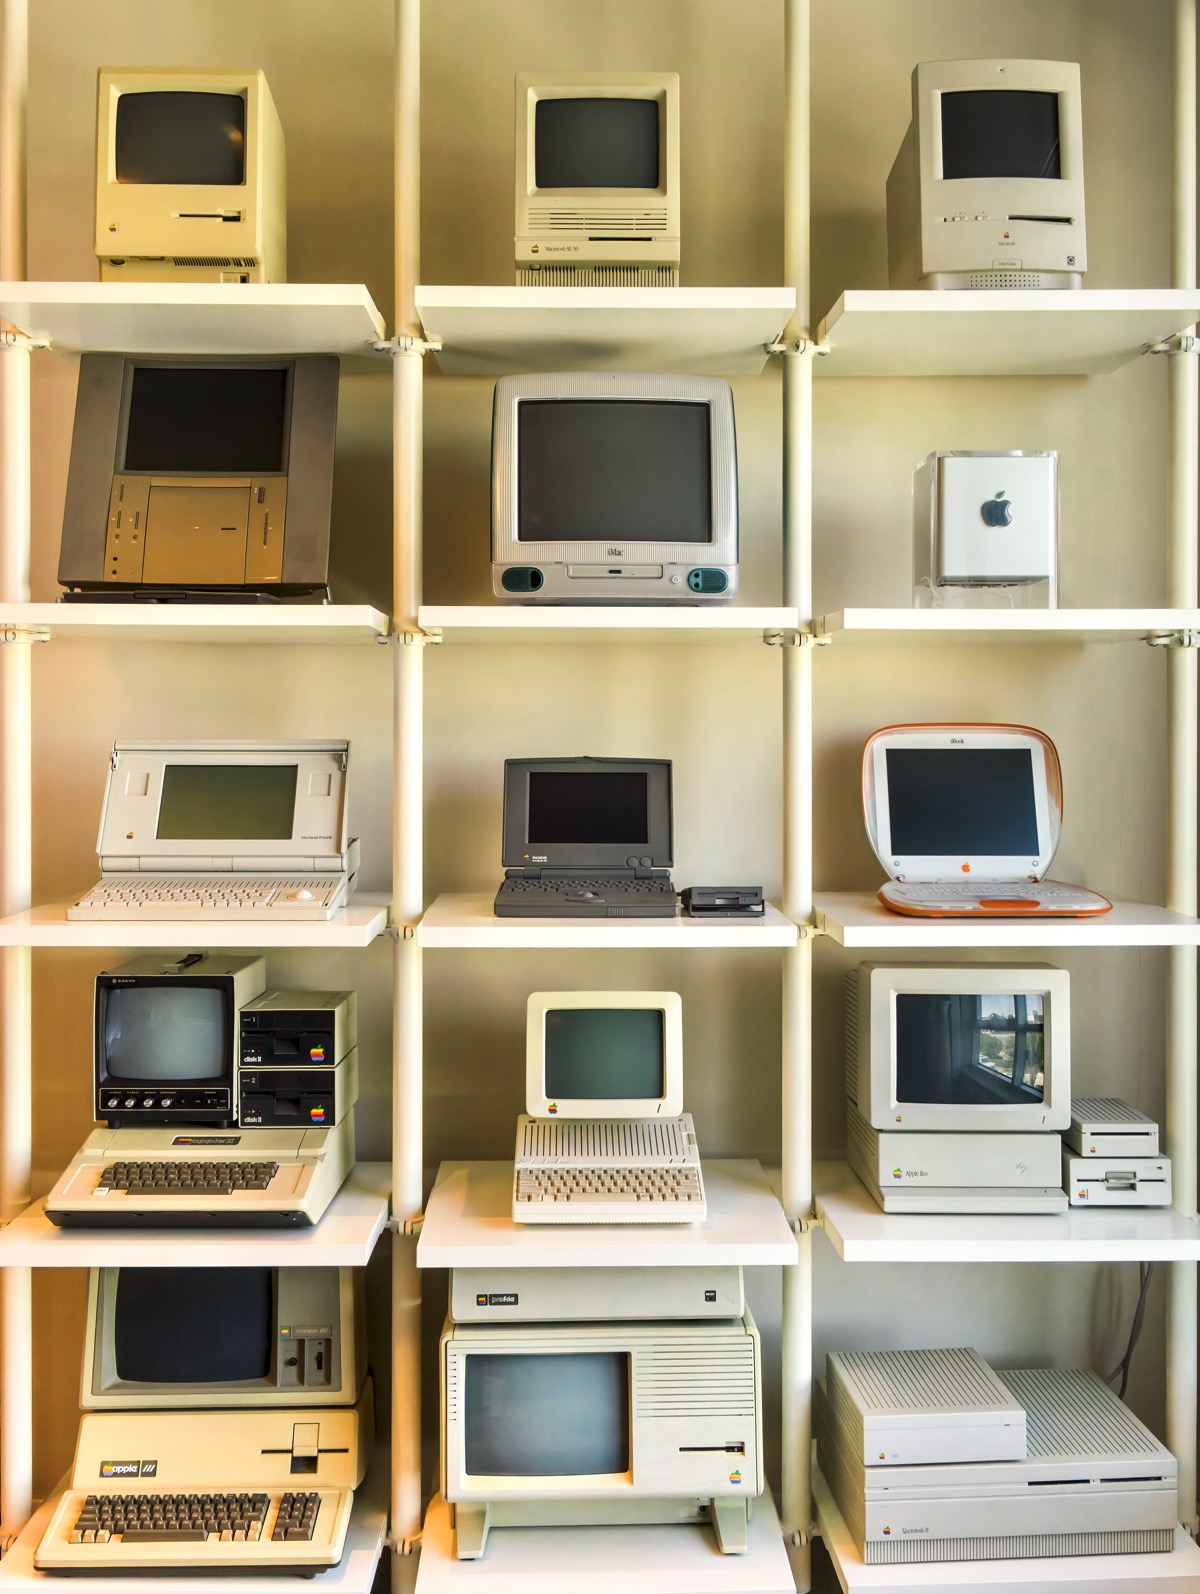 Jimmy Grewal's vintage Apple computer collection